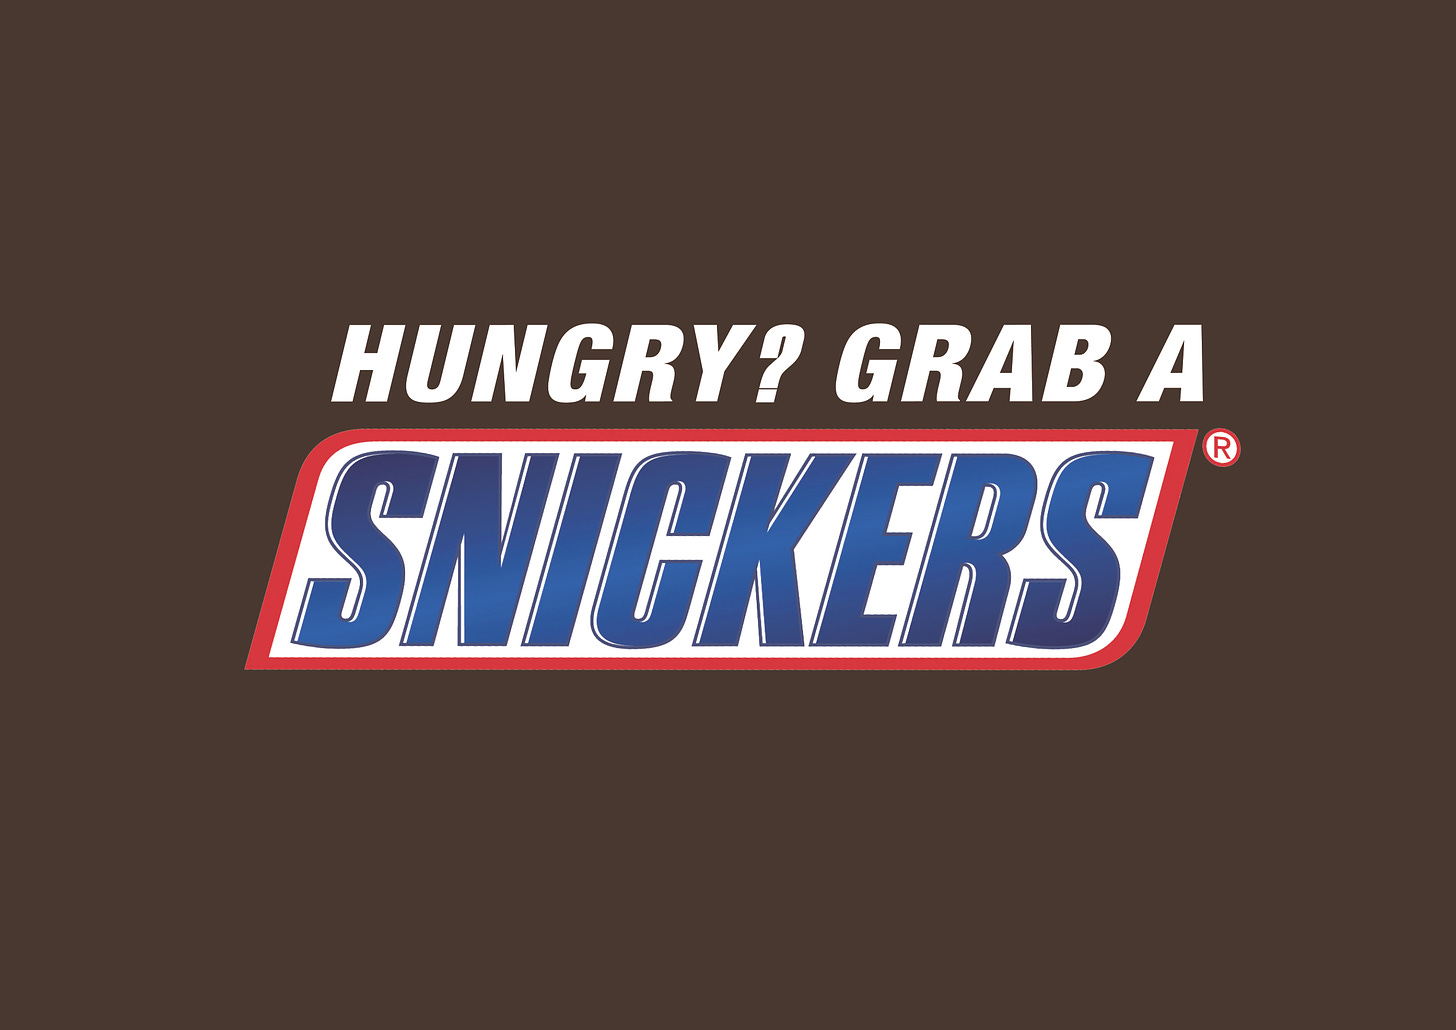 This Snickers ad relies on recency bias to get you to grab a Snickers when you're hungry.